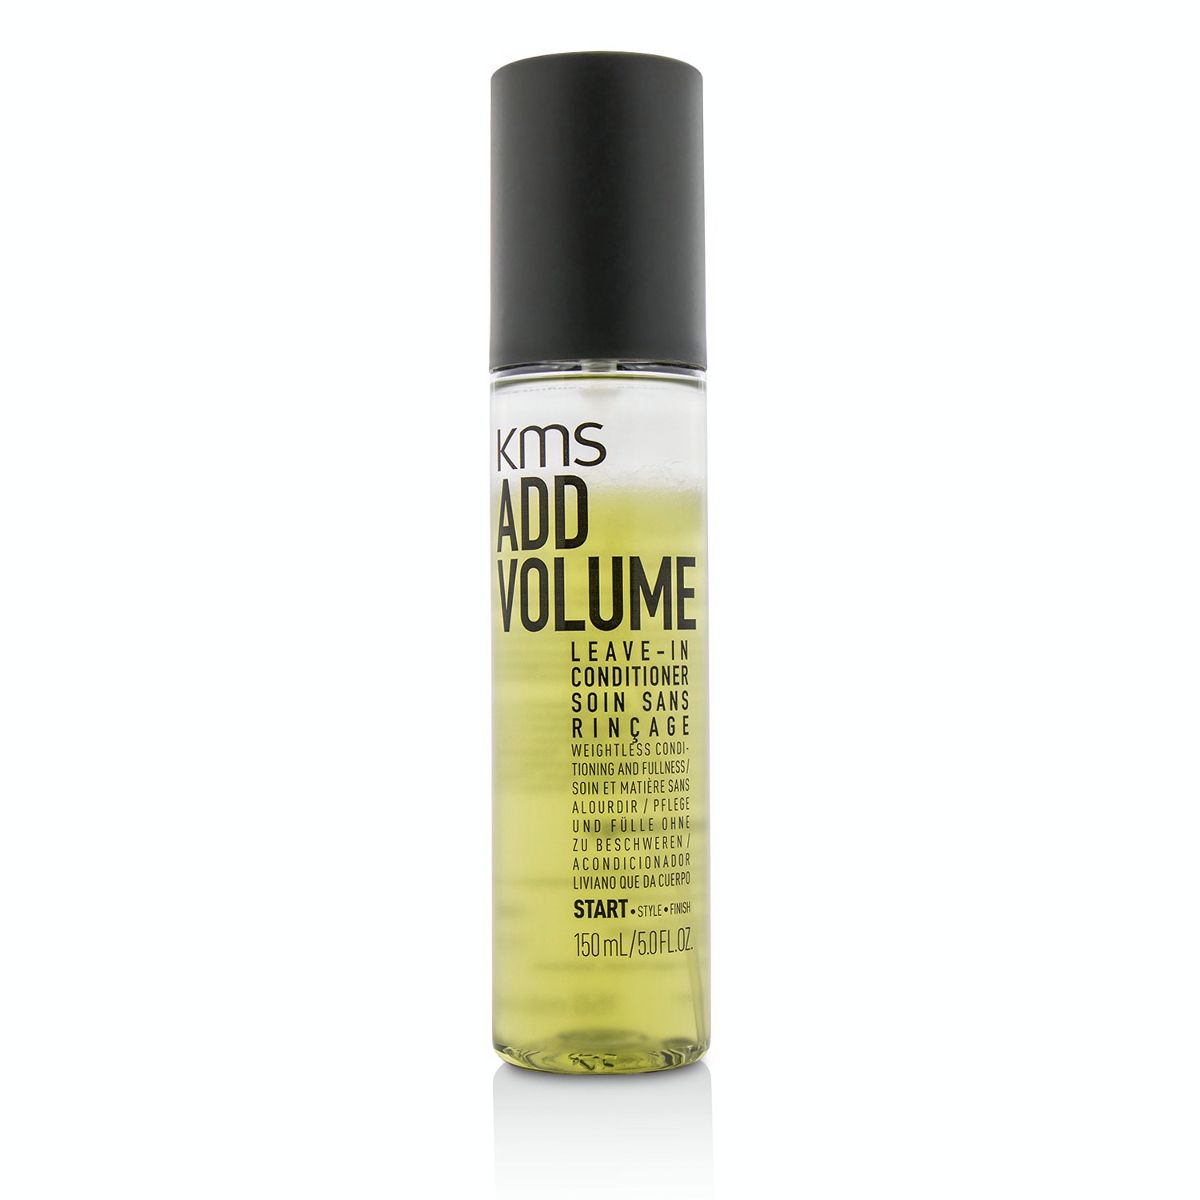 Add Volume Leave-In Conditioner (Weightless Conditioning and Fullness) KMS California Image